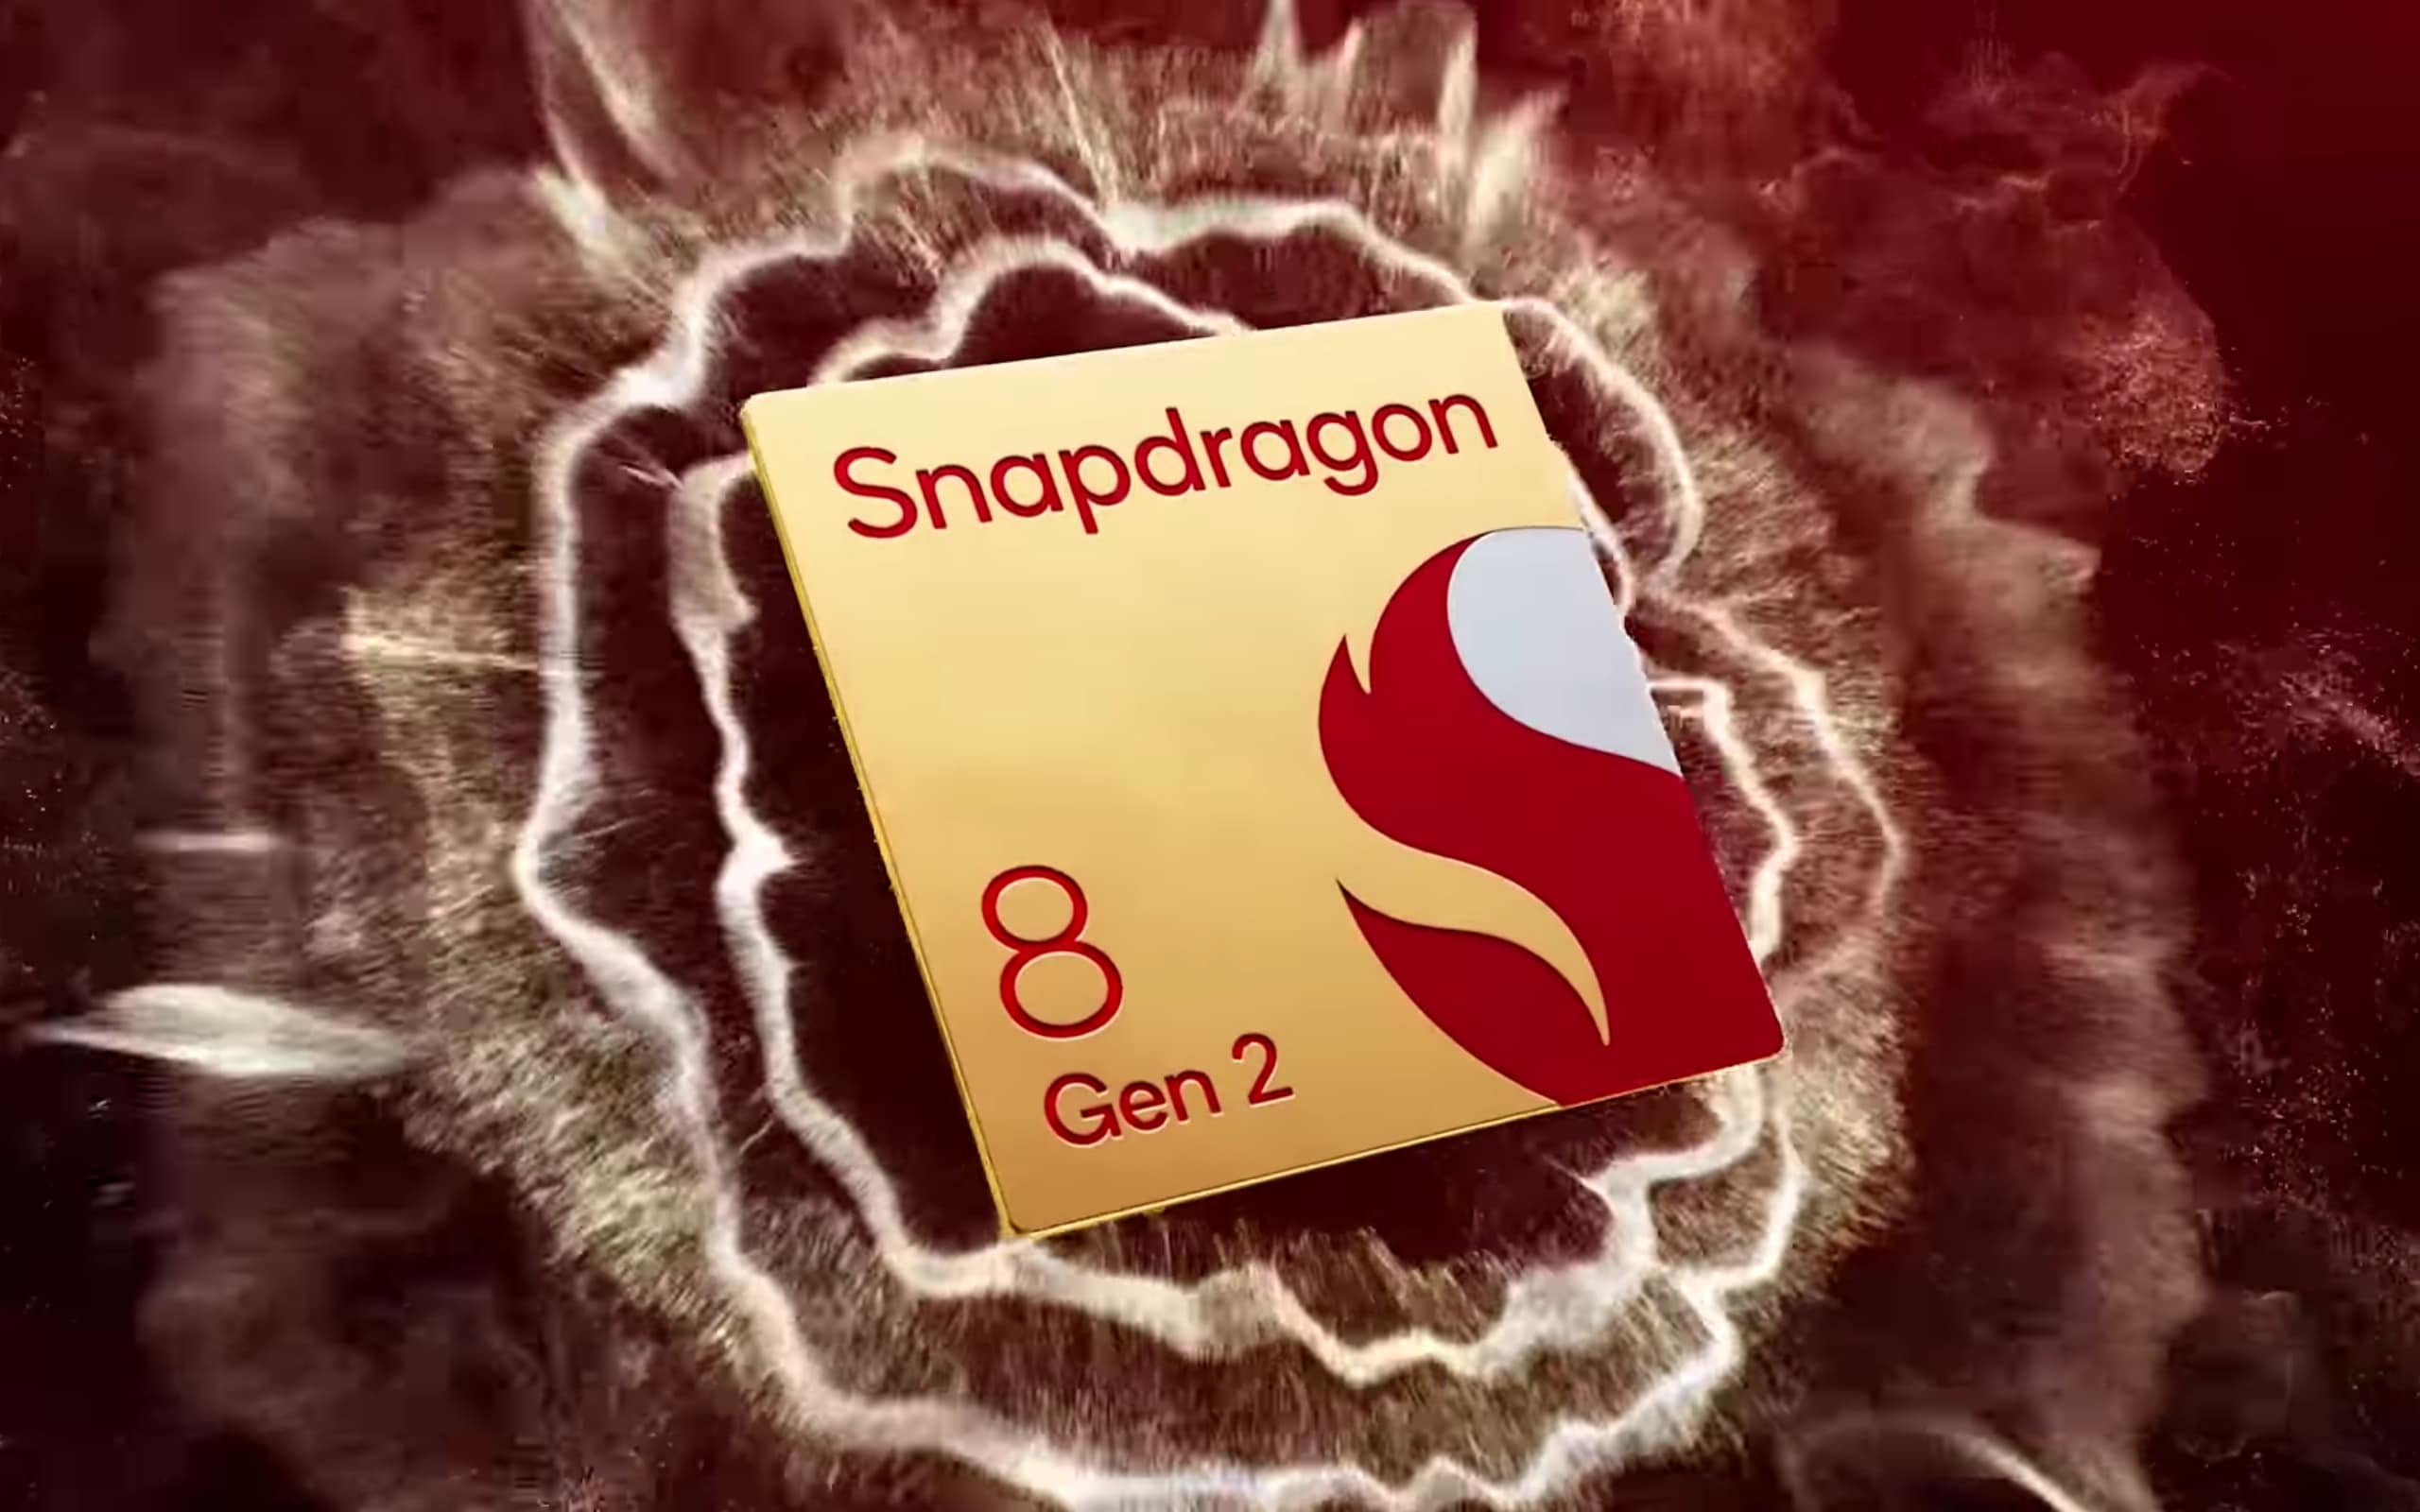 What’s new in Snapdragon 8 Gen 2?